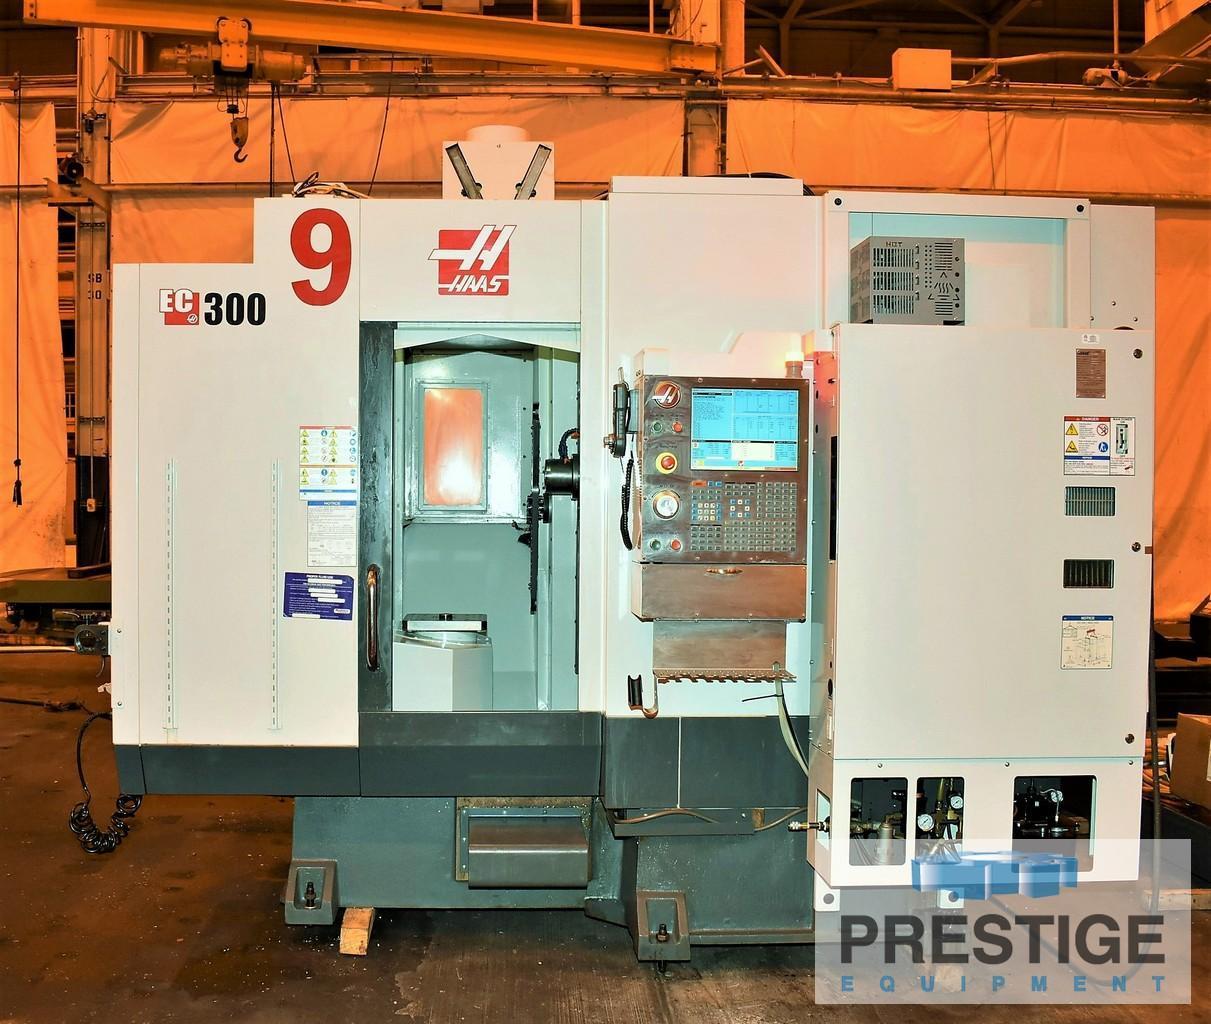 HAAS EC-300, (2) 11.8" Pallets, Full 4th Axis, X-20", Y-18", Z-14", 12000 RPM, 24-ATC, 300 PSI Coolant, 2013 #32370